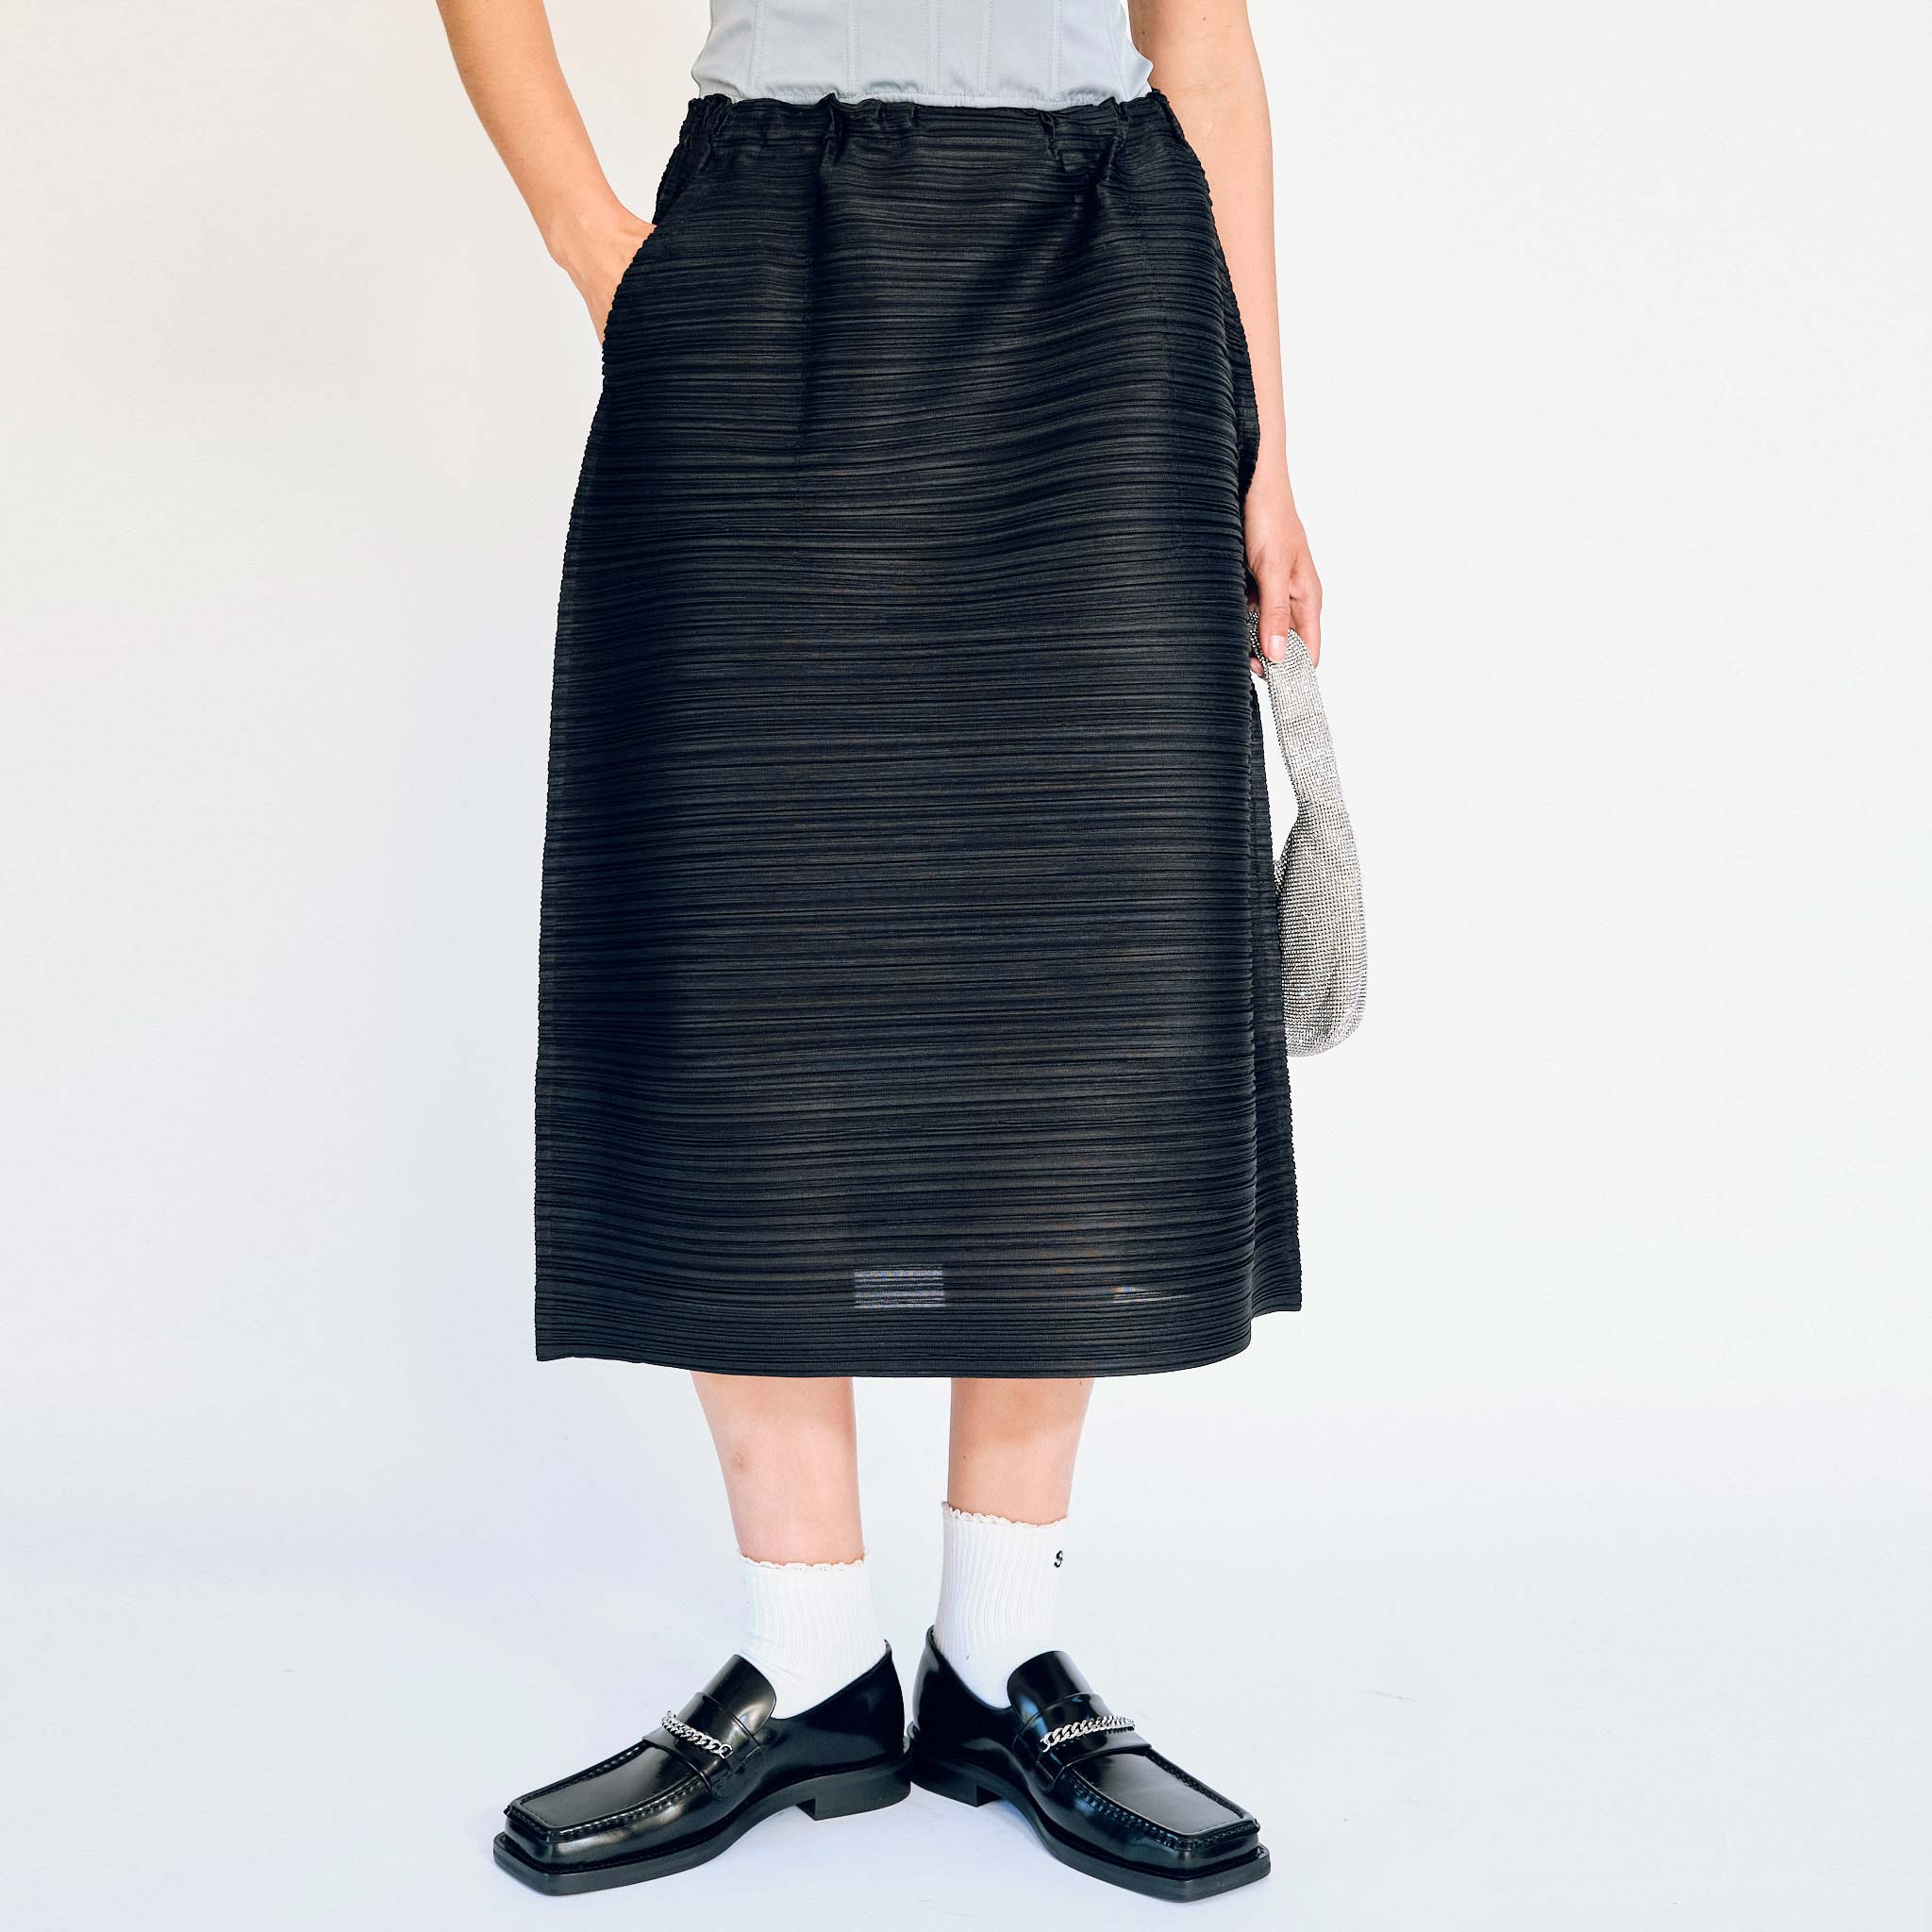 Horizontally pleated bouncy fabric black skirt by Pleats Please, front detail view on model.